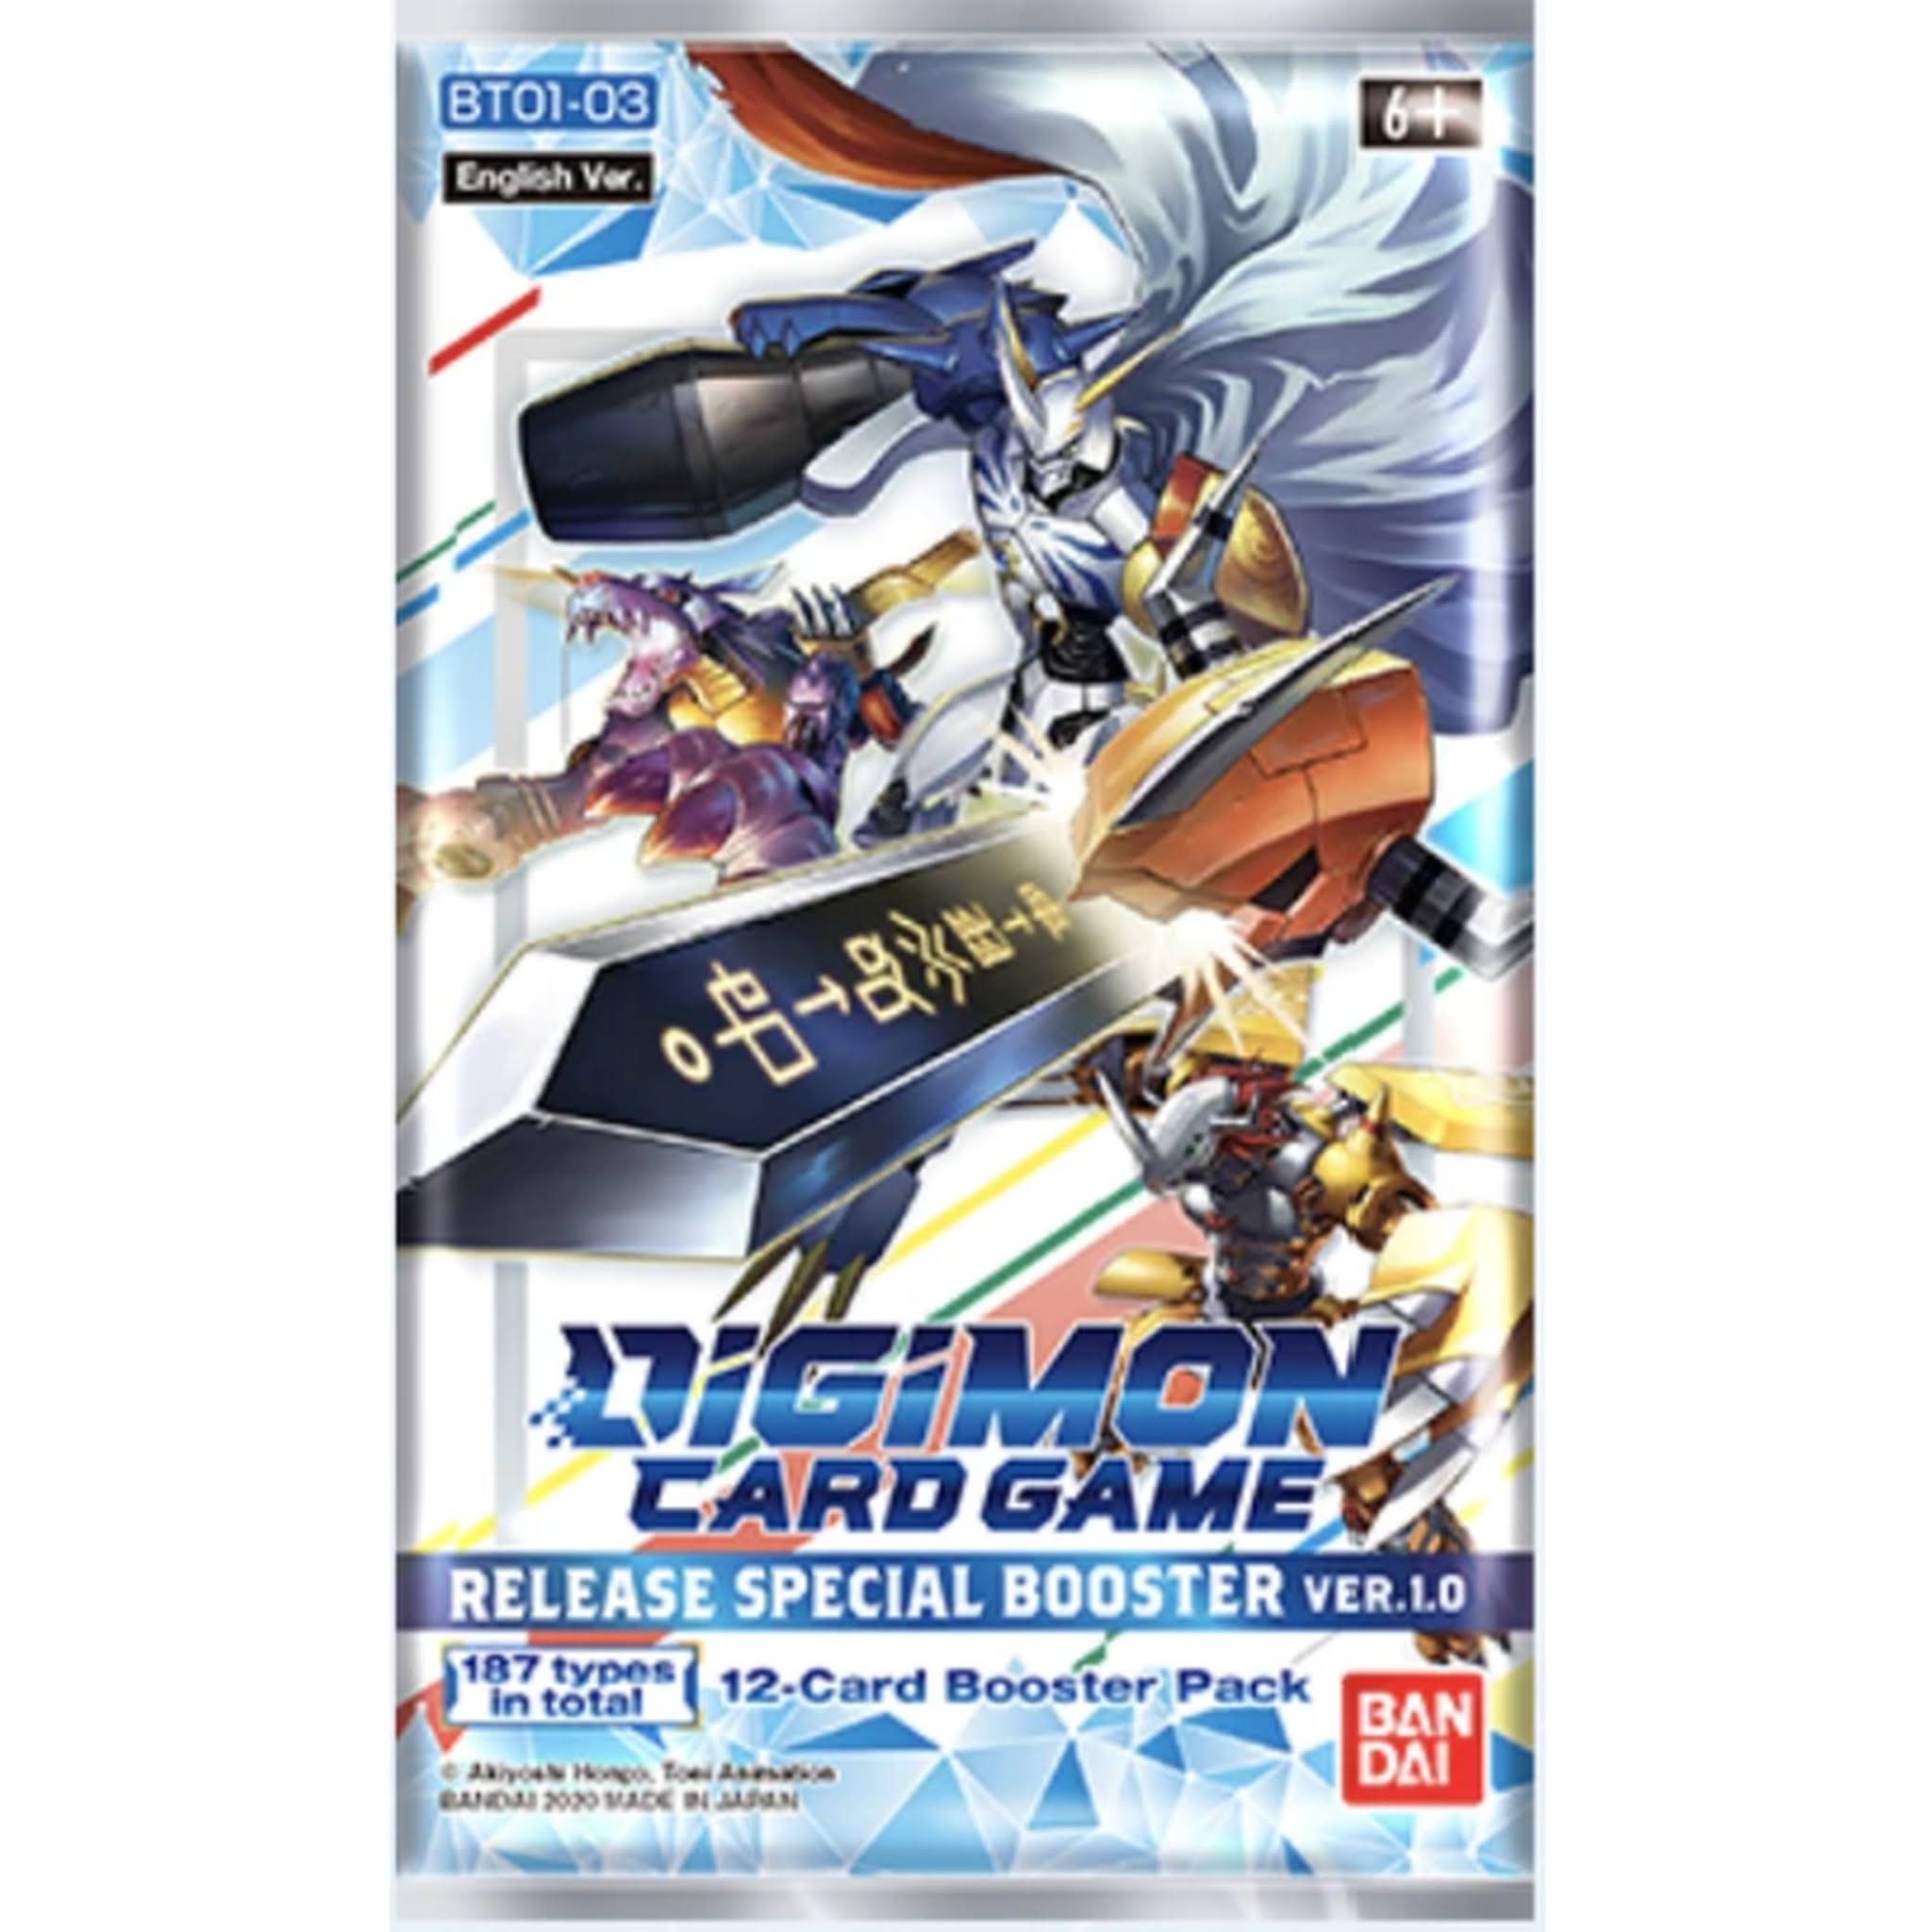 Digimon Card Game: Release Special Booster Pack Ver.1.0 BT01-03